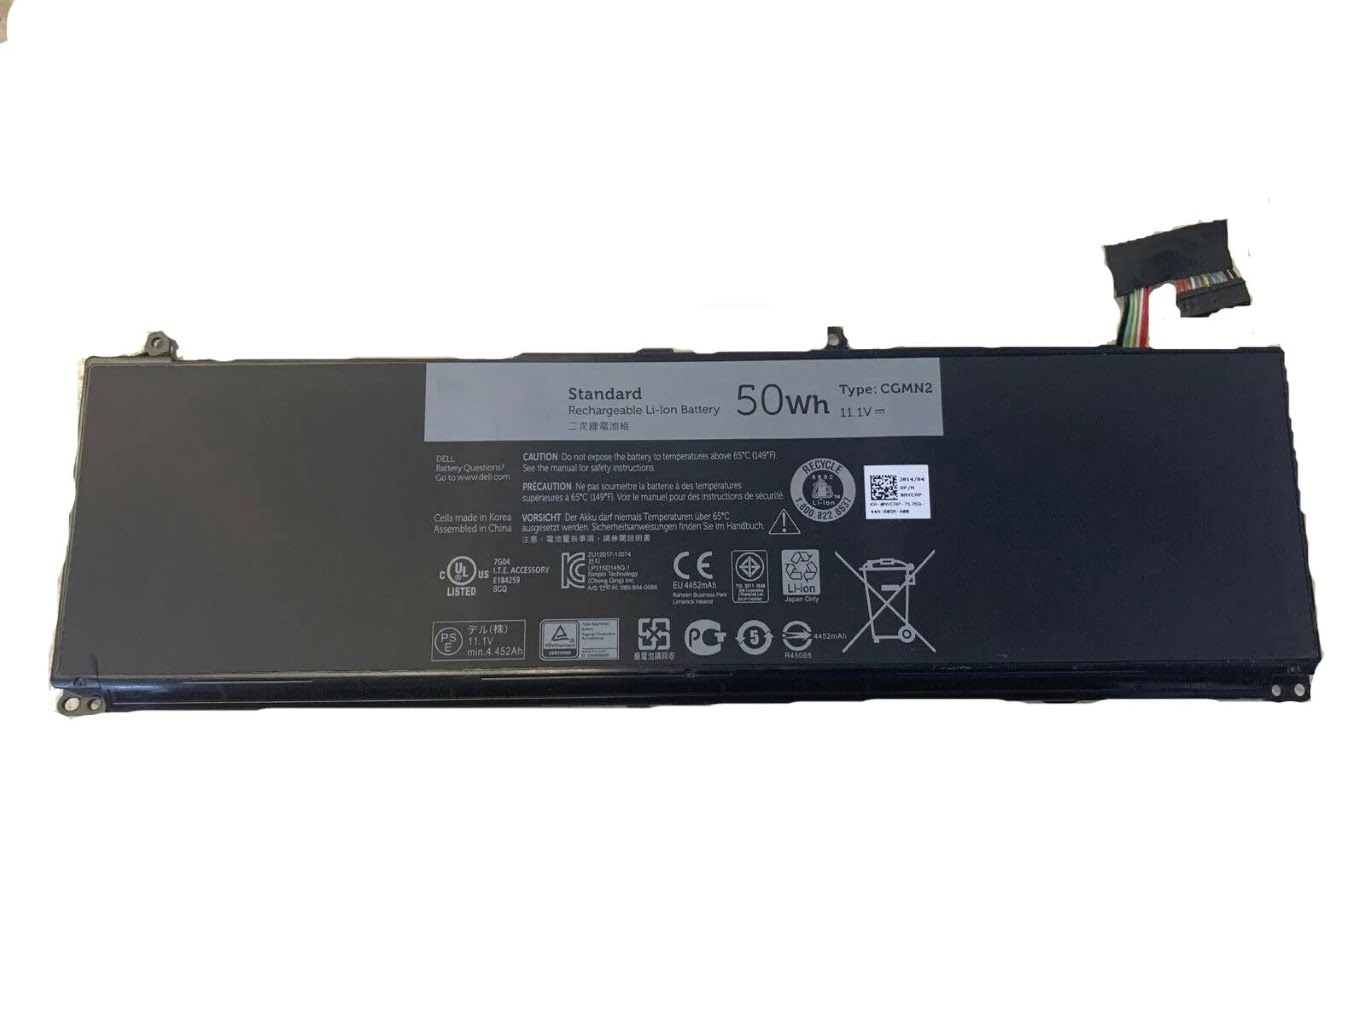 Dell 0cgmn2, 3icp7/65/80 Laptop Battery For Inspiron 11 3000, Inspiron 11 3137 replacement